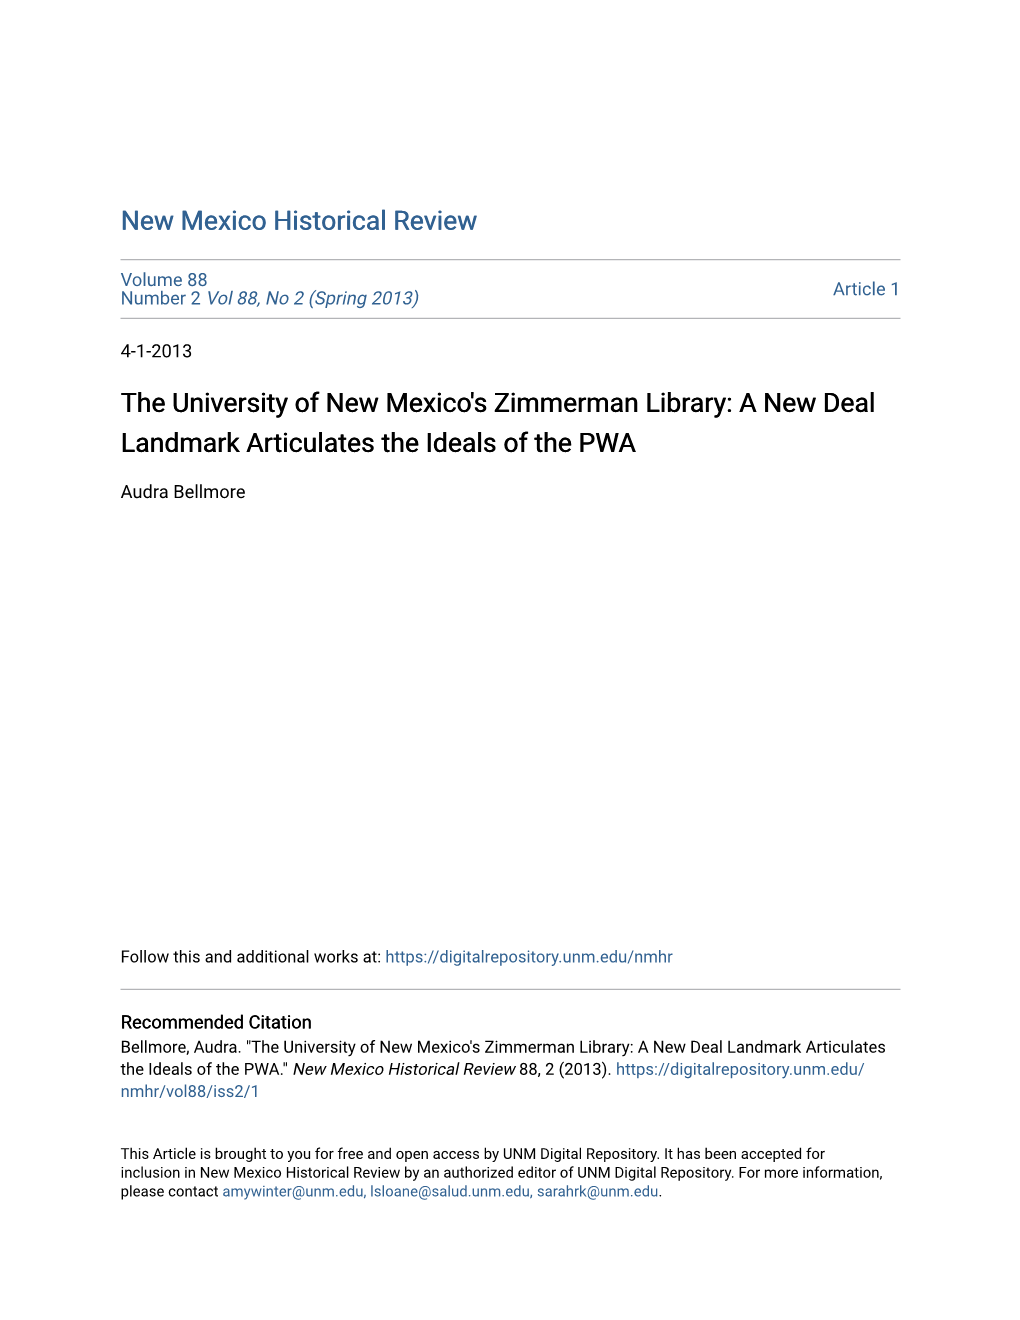 The University of New Mexico's Zimmerman Library: a New Deal Landmark Articulates the Ideals of the PWA